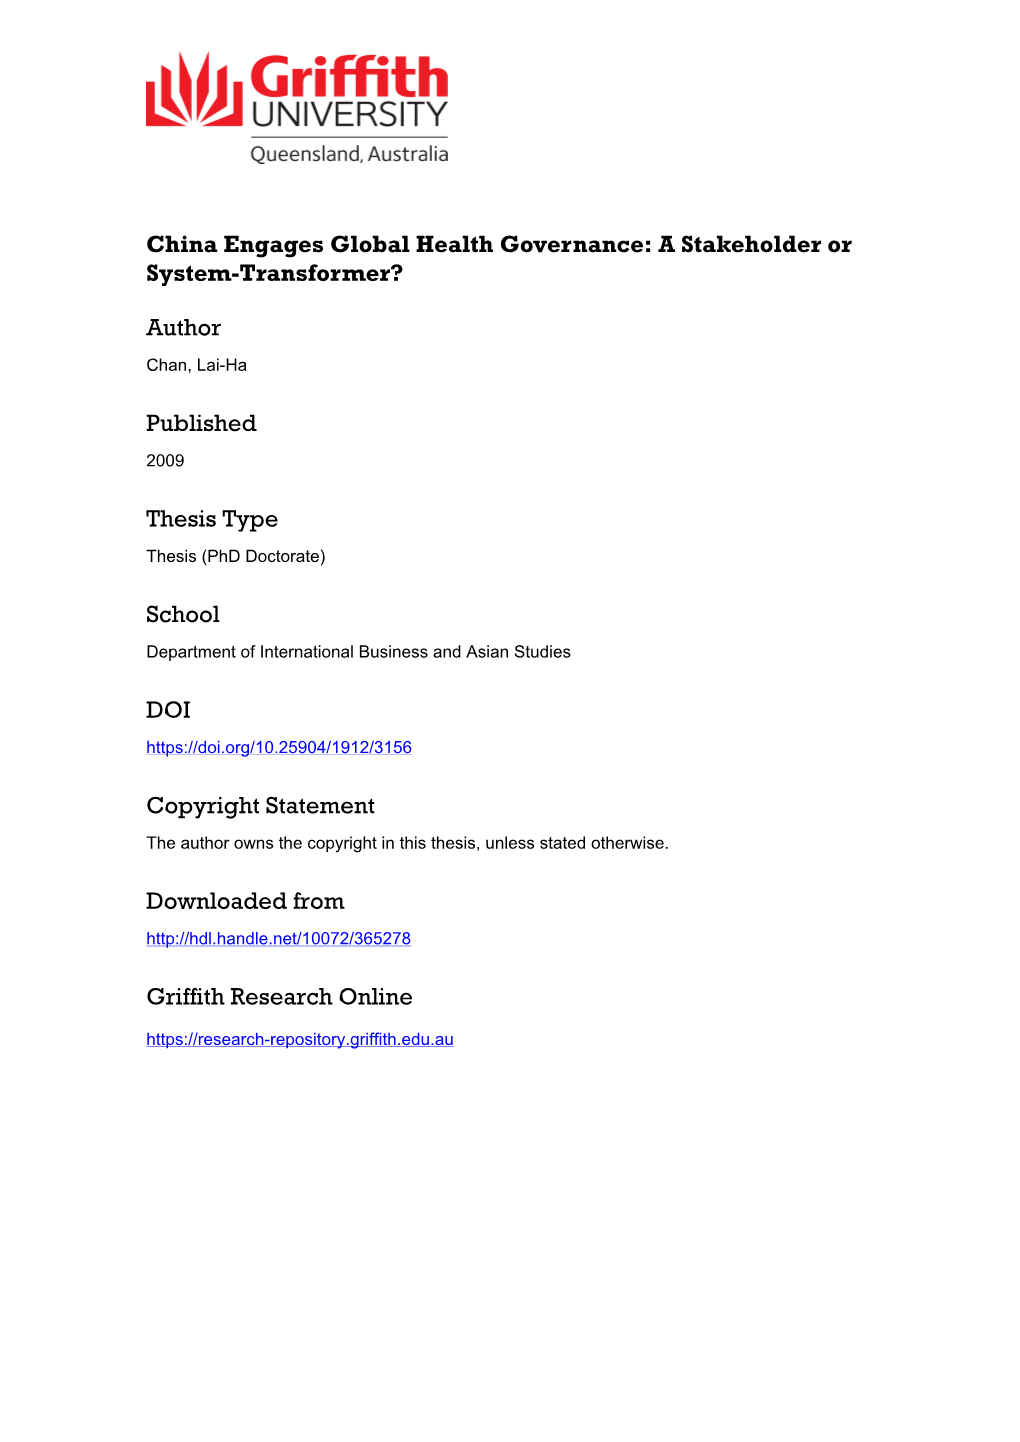 China Engages Global Health Governance: a Stakeholder Or System-Transformer?